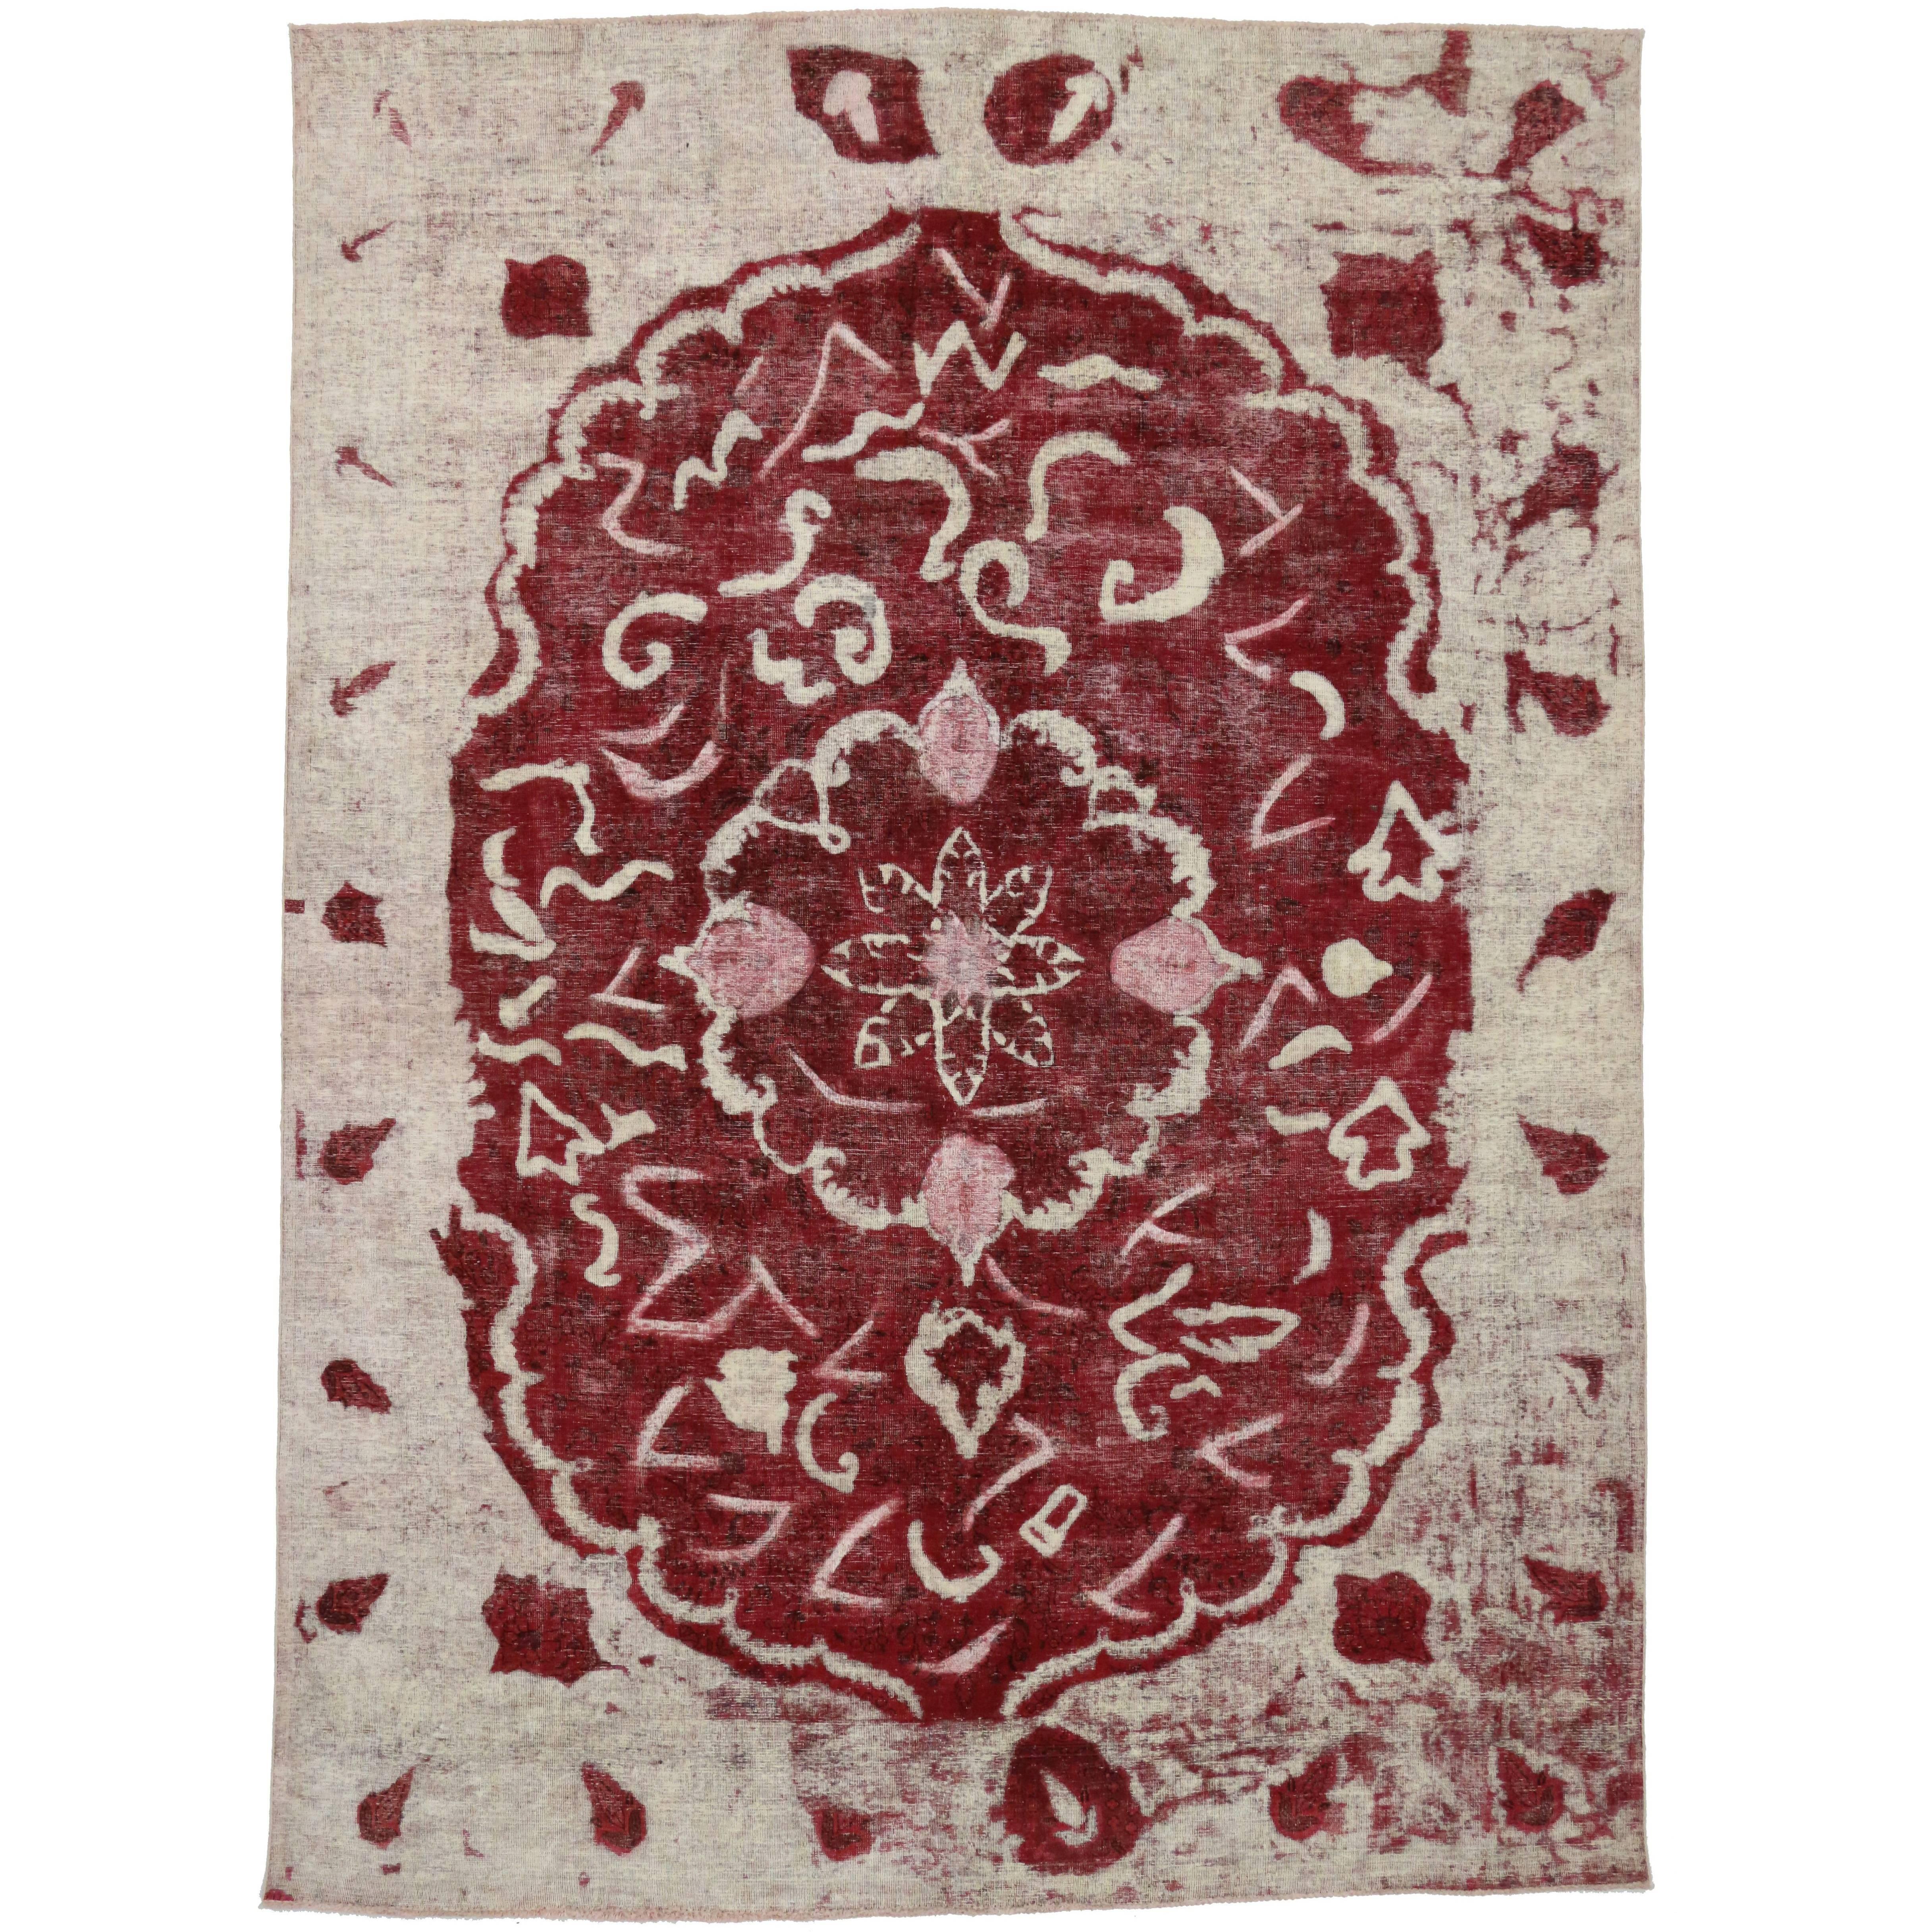 Vintage Persian Red Overdyed Rug, Bucolic Romance Meets Rustic Charm